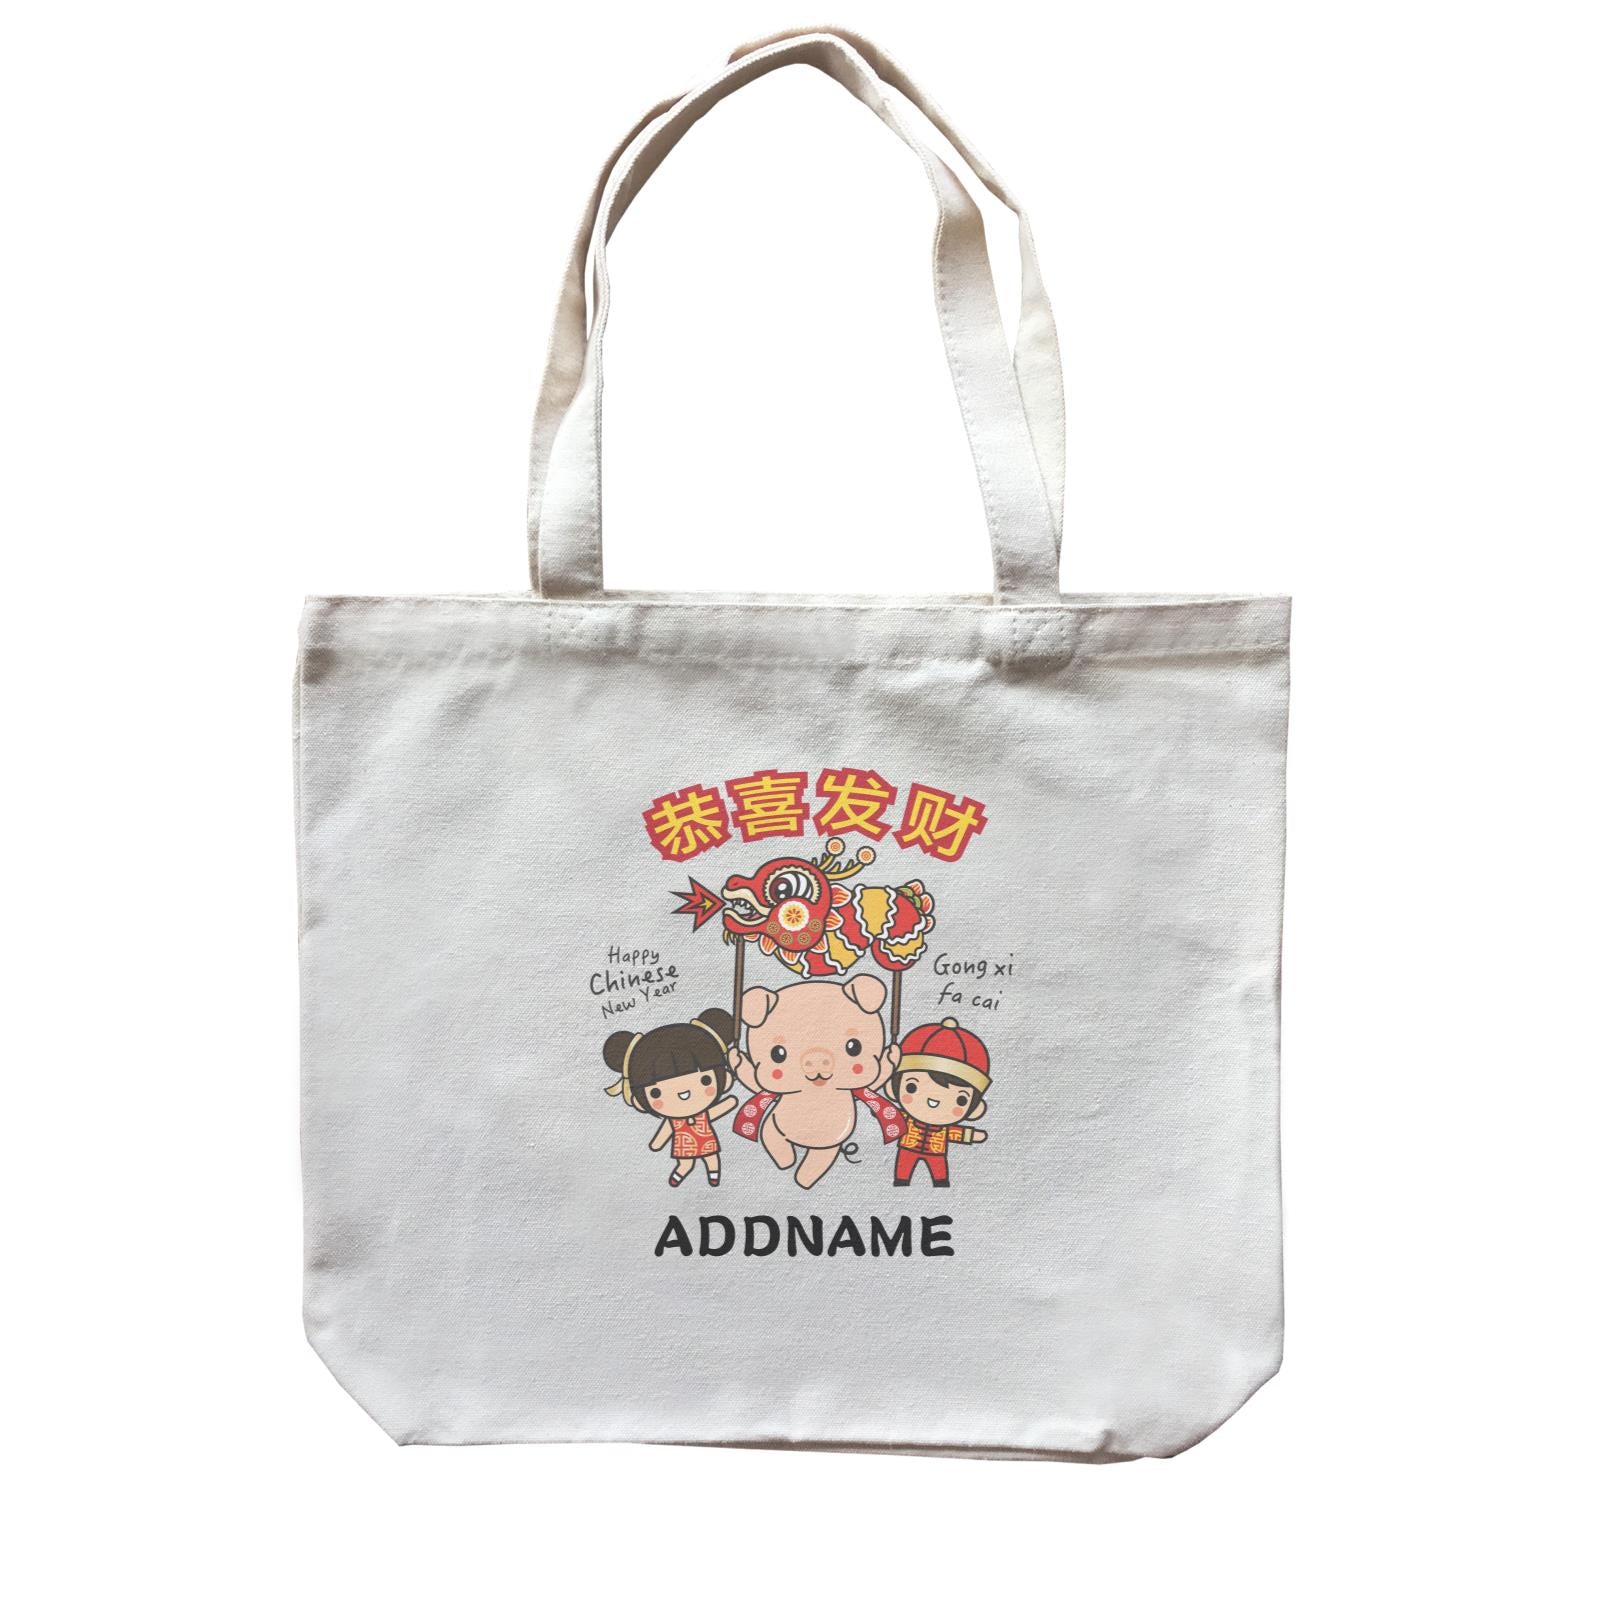 Prosperity Pig Boy, Girl and Baby Pig with Dragon Dance Accessories Canvas Bag